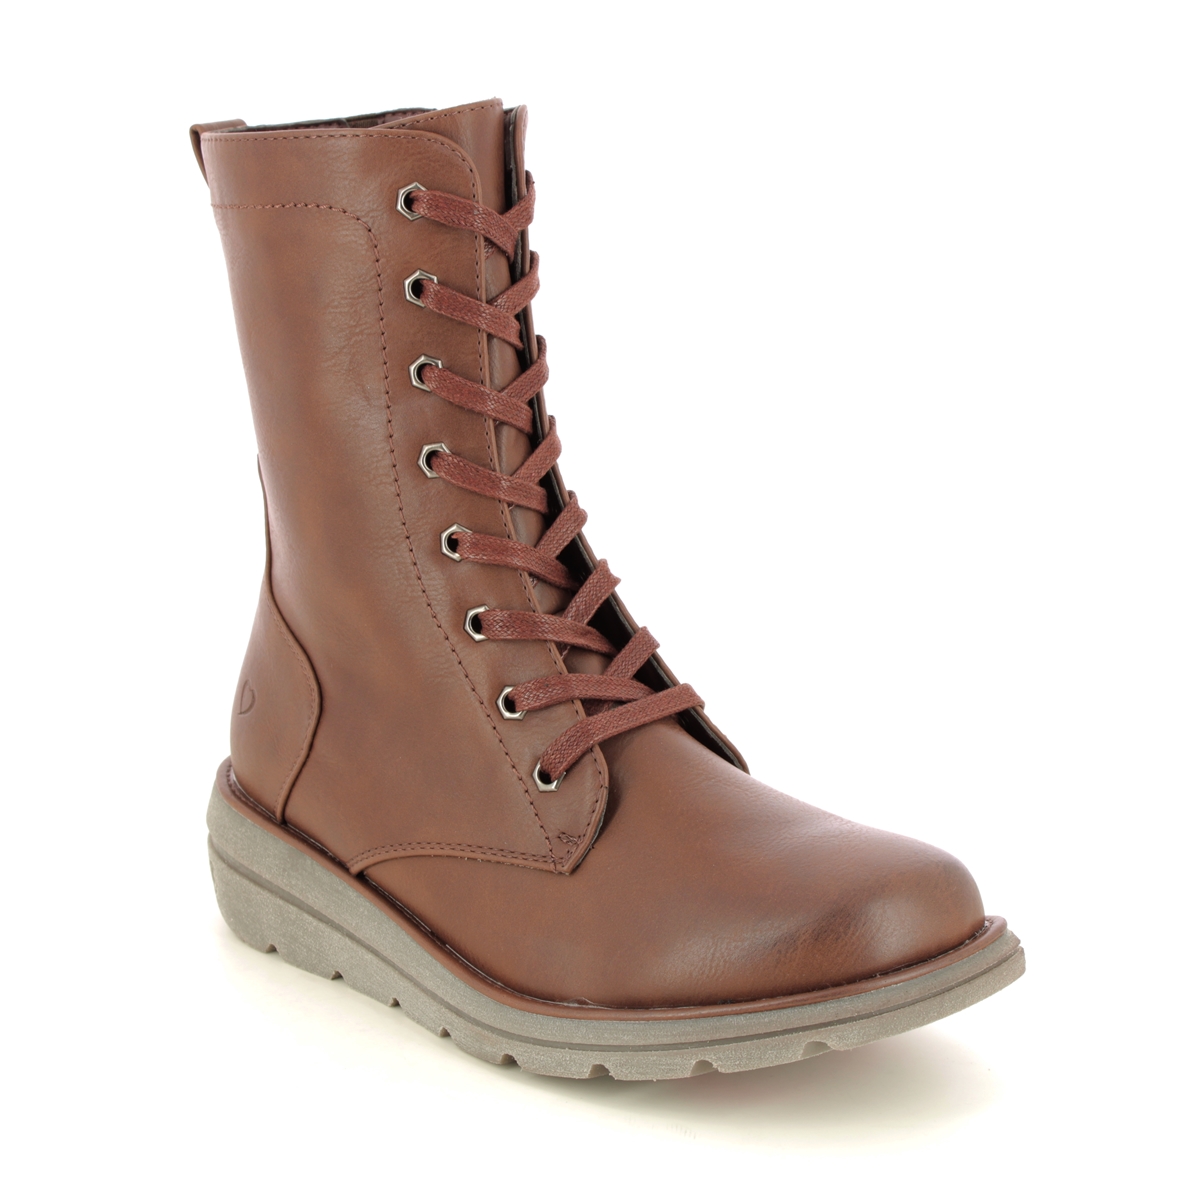 Heavenly Feet Martina 3 Walker Chocolate brown Womens Lace Up Boots 3007-22 in a Plain Man-made in Size 3